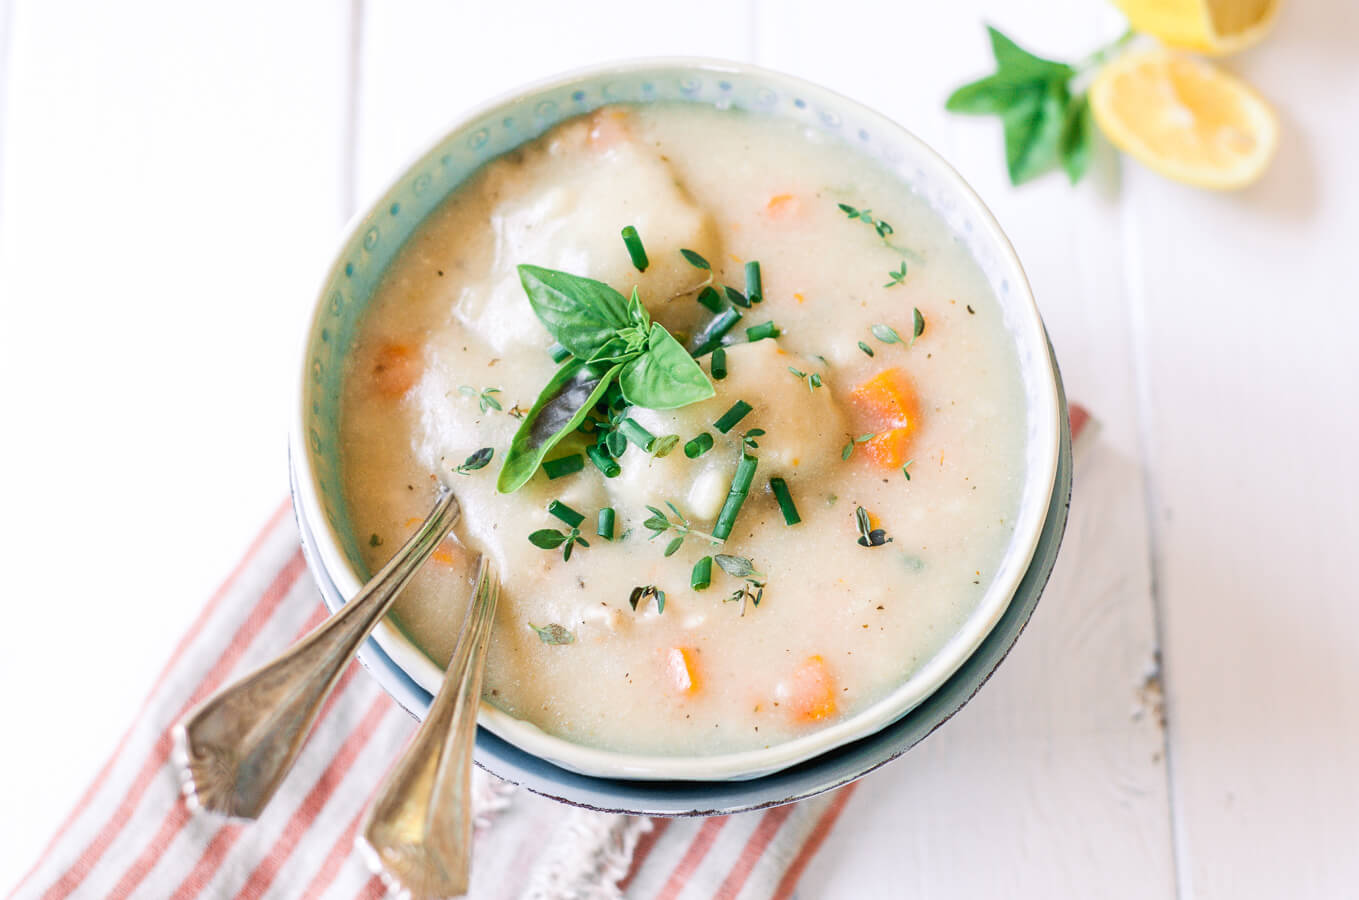 Gluten free and dairy free chicken and dumpling soup. Get ready for fall with this healthy, easy to make, and delicious recipe for soup. Healthy gluten free dinner ideas. One gluten free pot dinners.